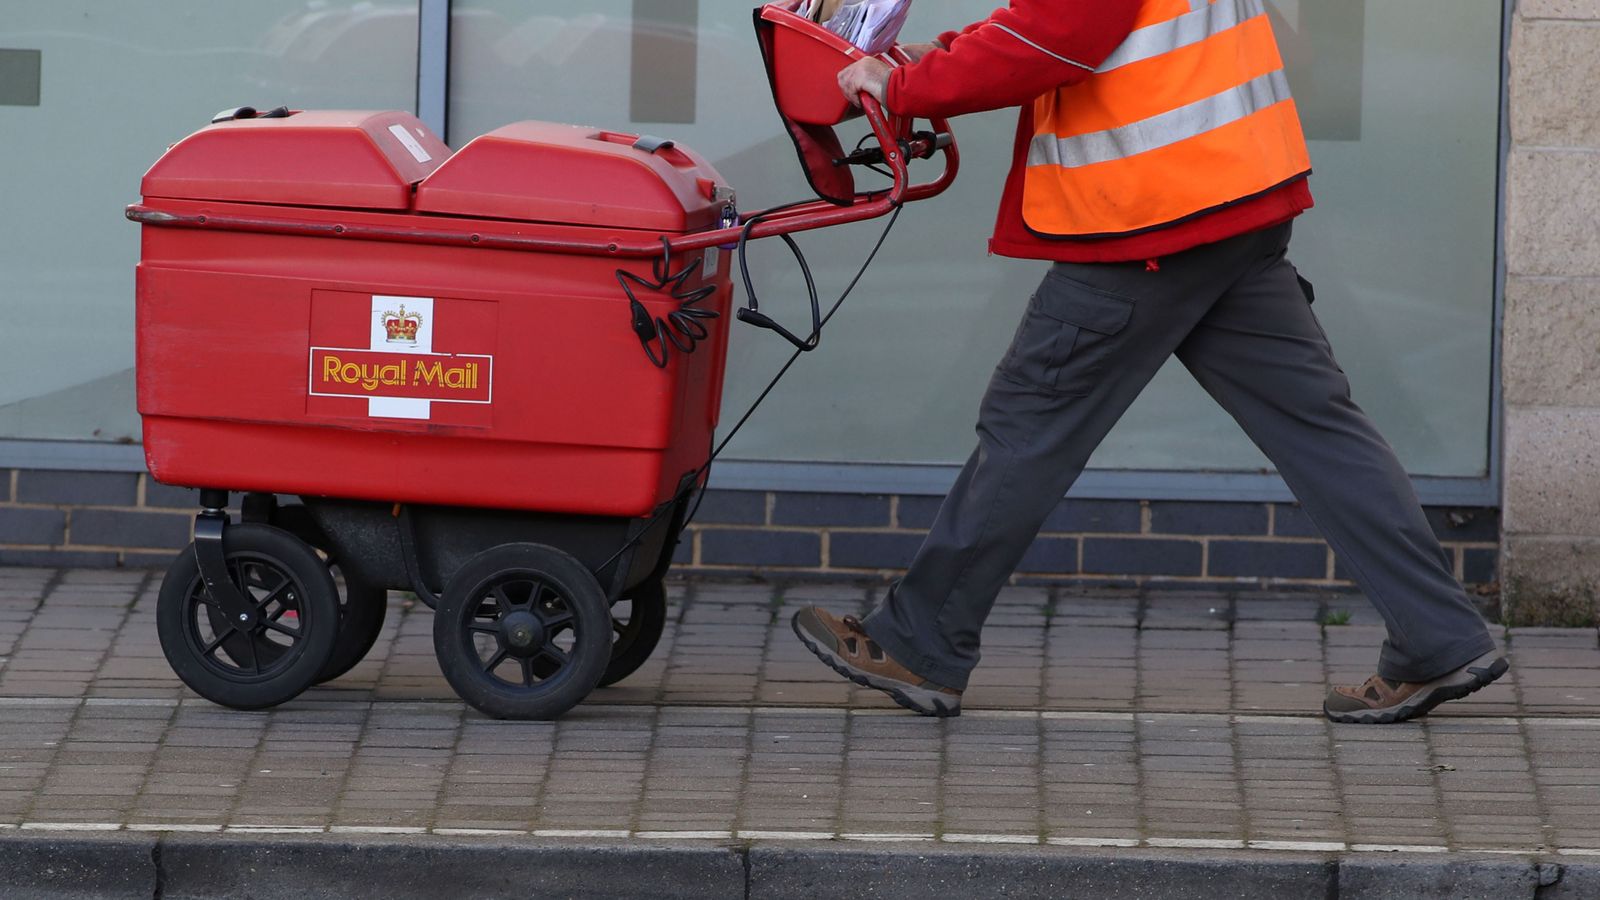 Royal Mail plans to make up to 6,000 roles redundant by August